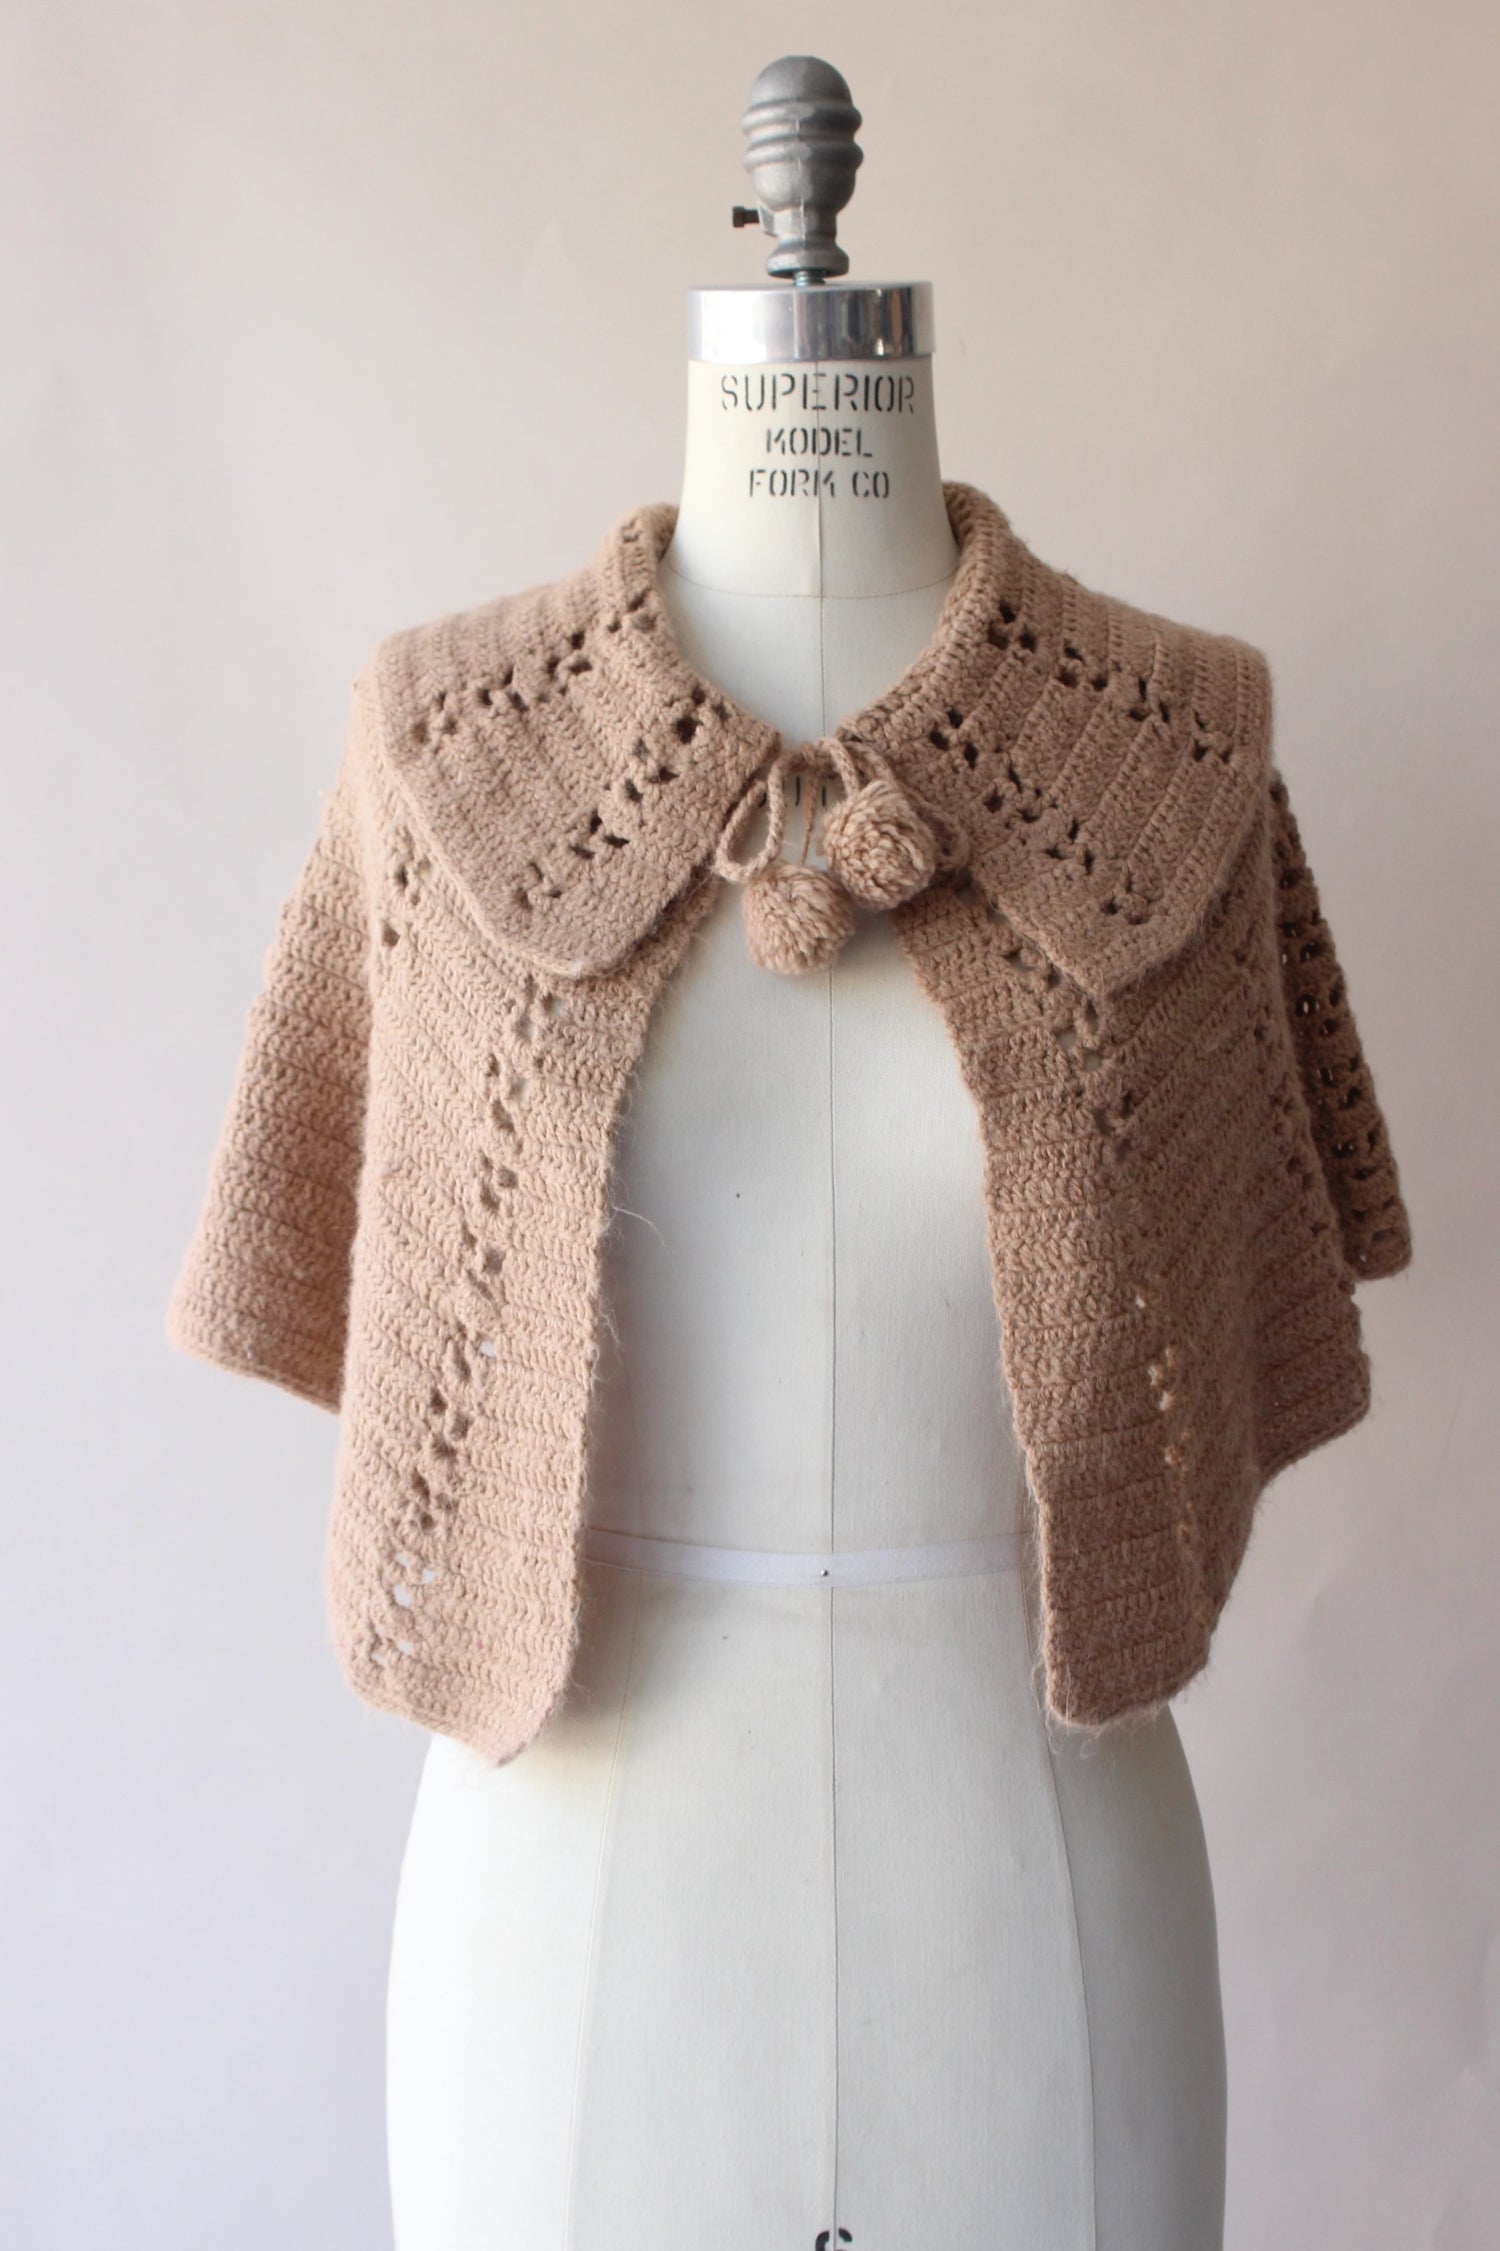 Vintage 1960s Chocolate Brown Knit Capelet